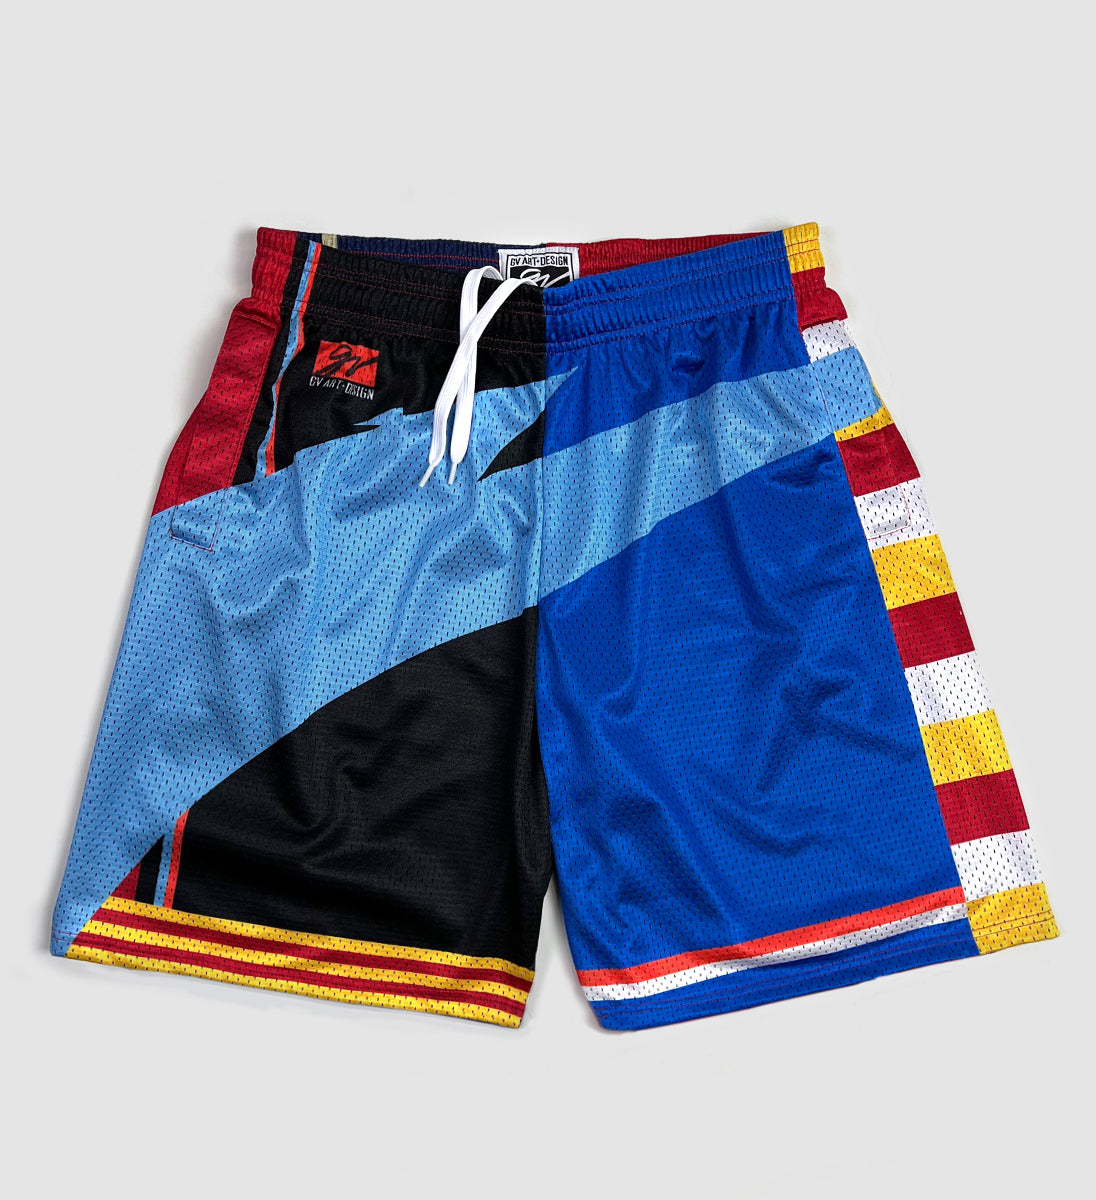 Limited Edition Cleveland Tradition Mesh Basketball Shorts